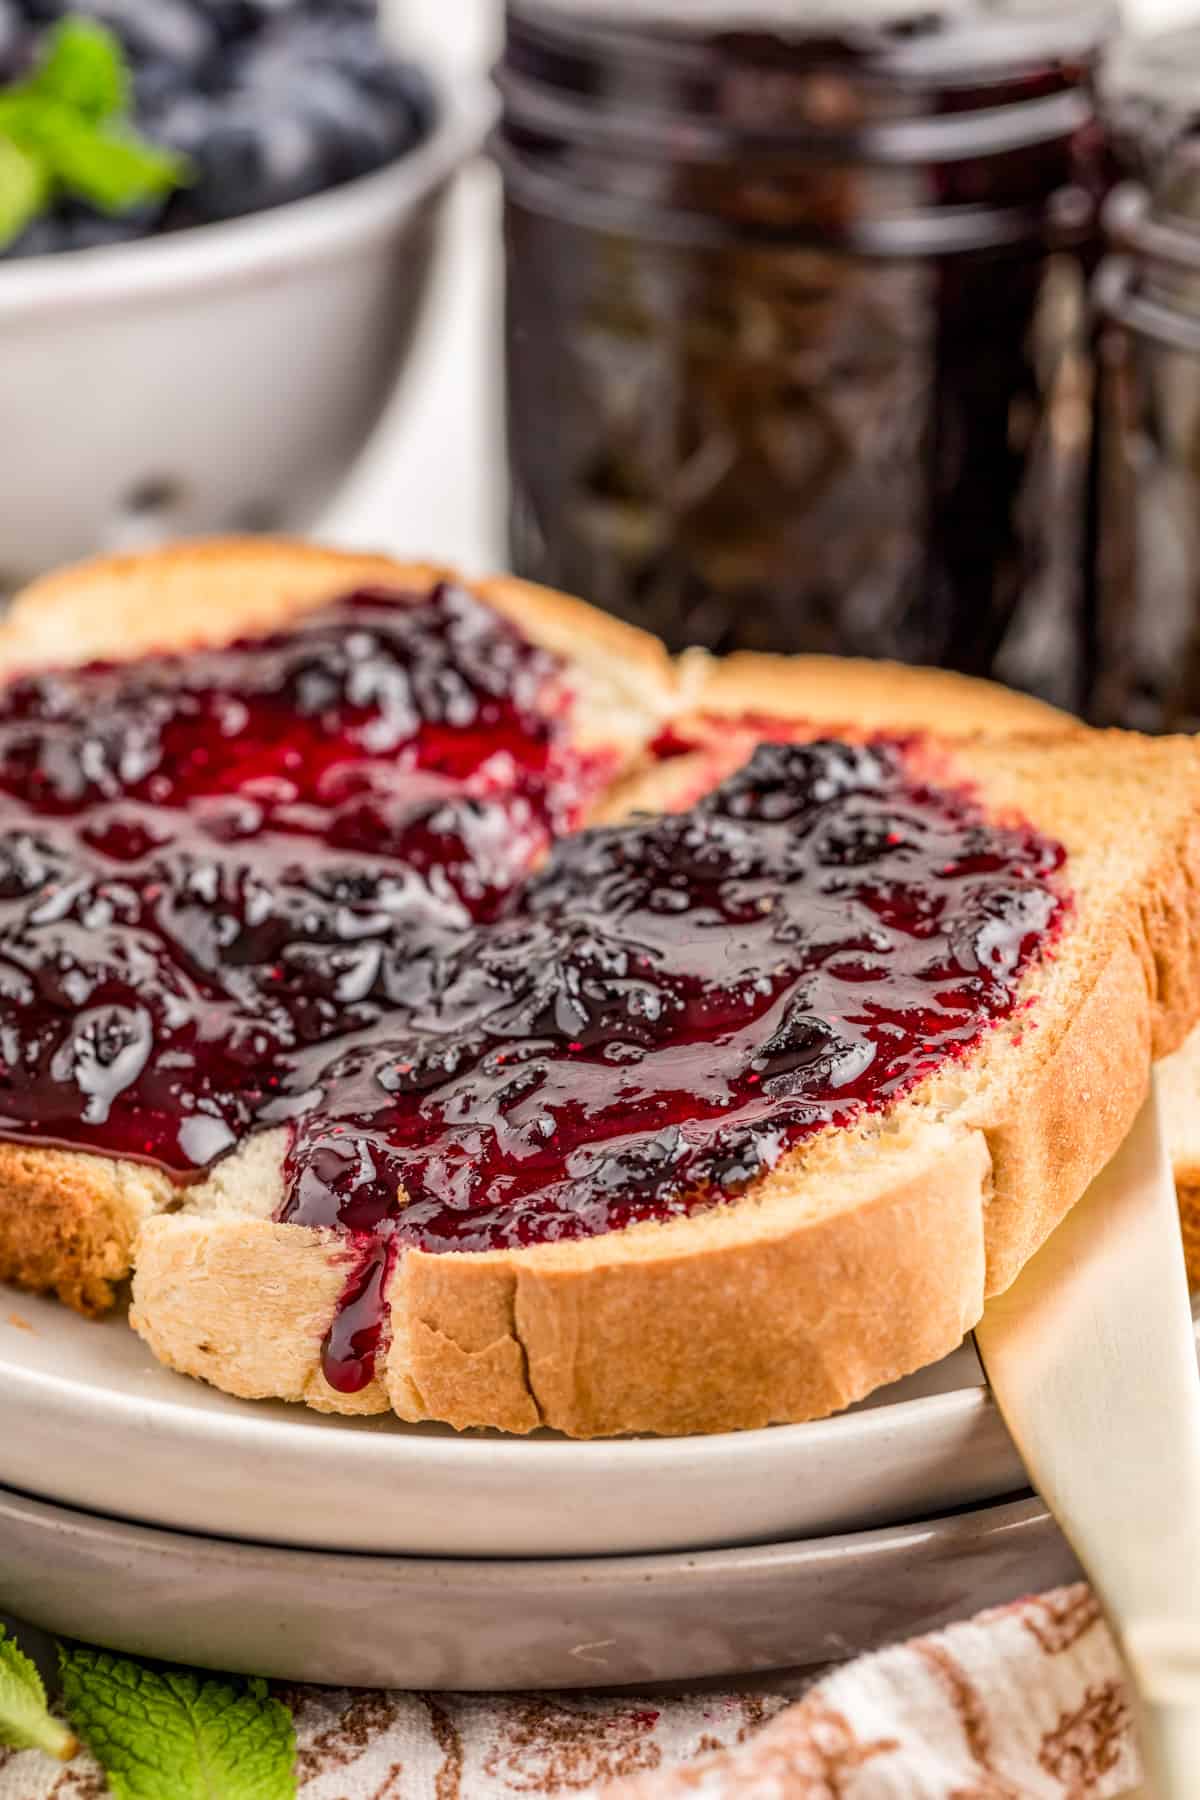 Jam spread on a cut piece of toast on white plate with jam in mason jar in background.